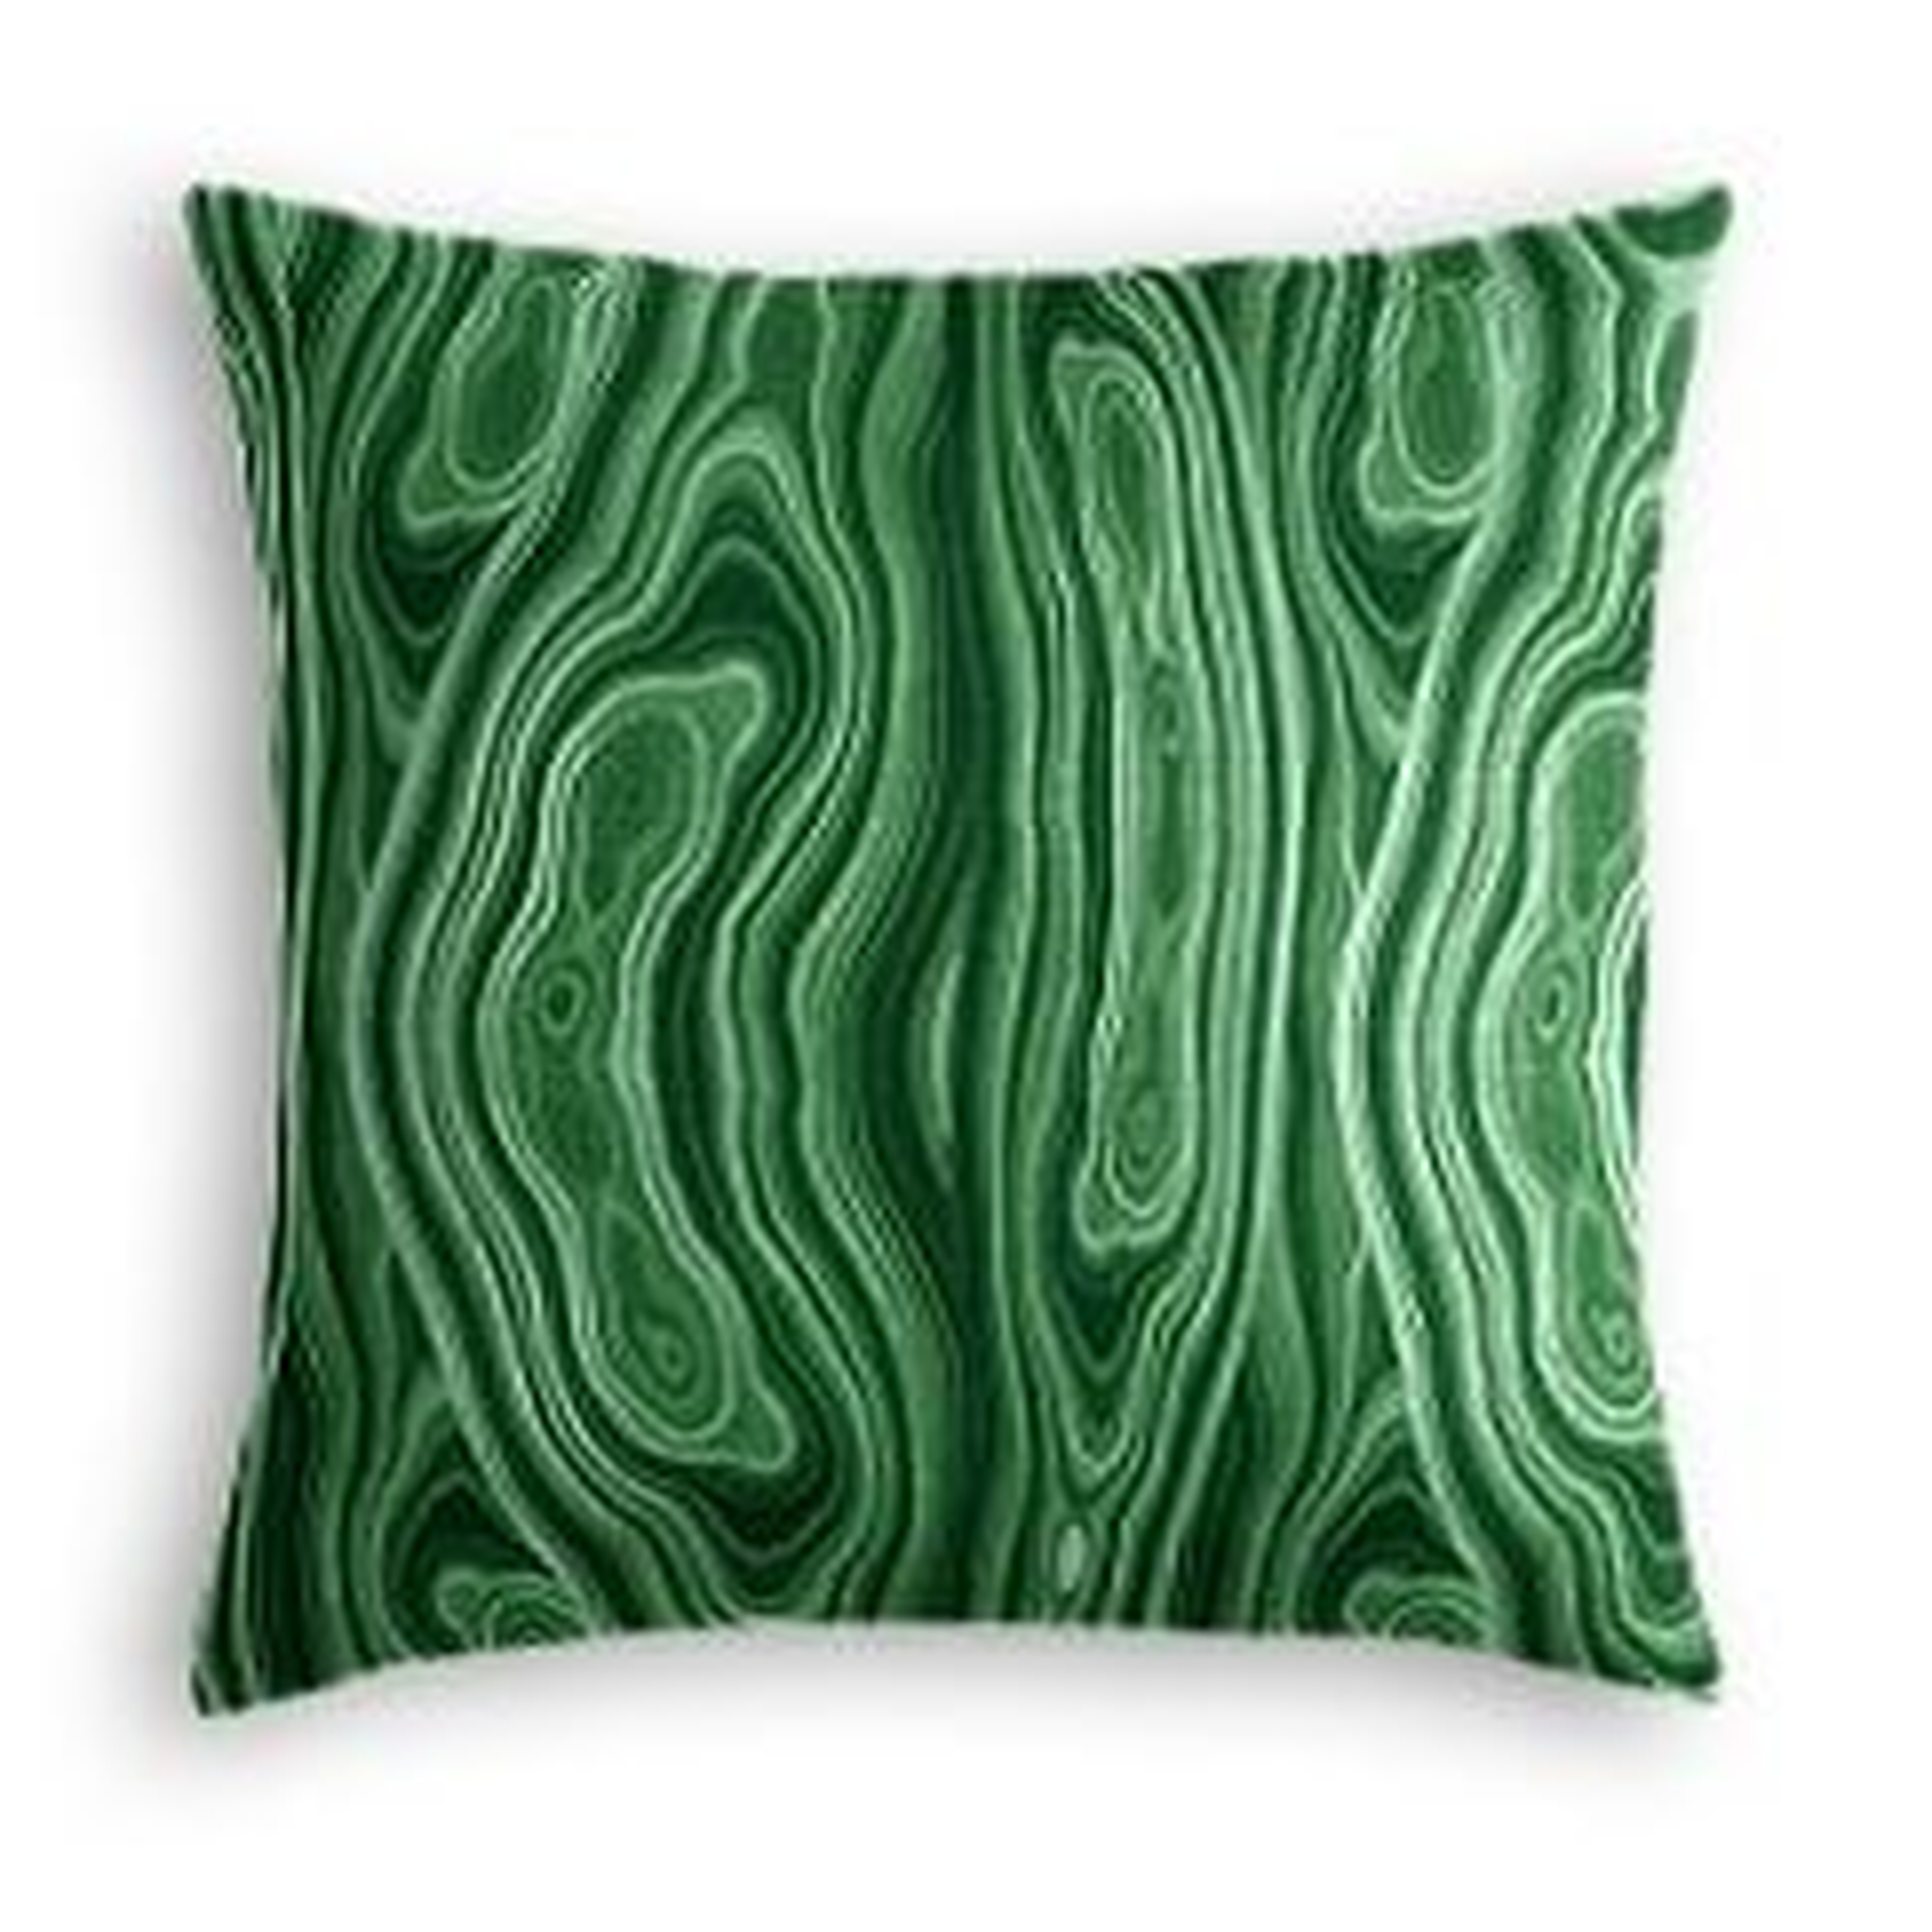 Green Malachite Throw Pillow -Insert not included - Loom Decor